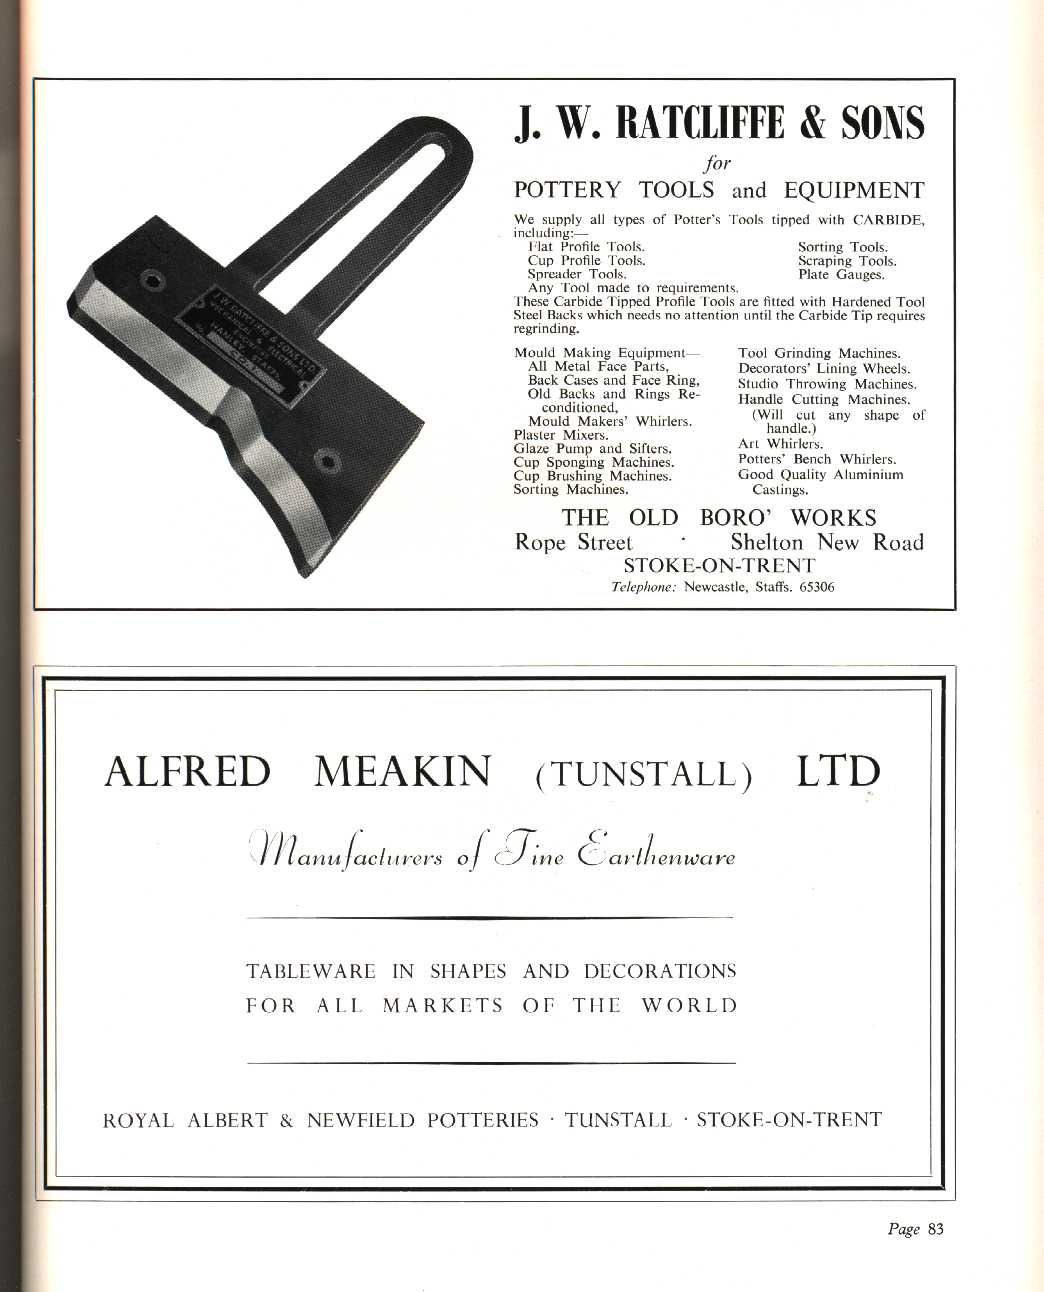 J. W. Ratcliffe & Sons (Shelton) (Pottery tools and equipment suppliers), Alfred Meakin (Tunstall) Ltd (potters)